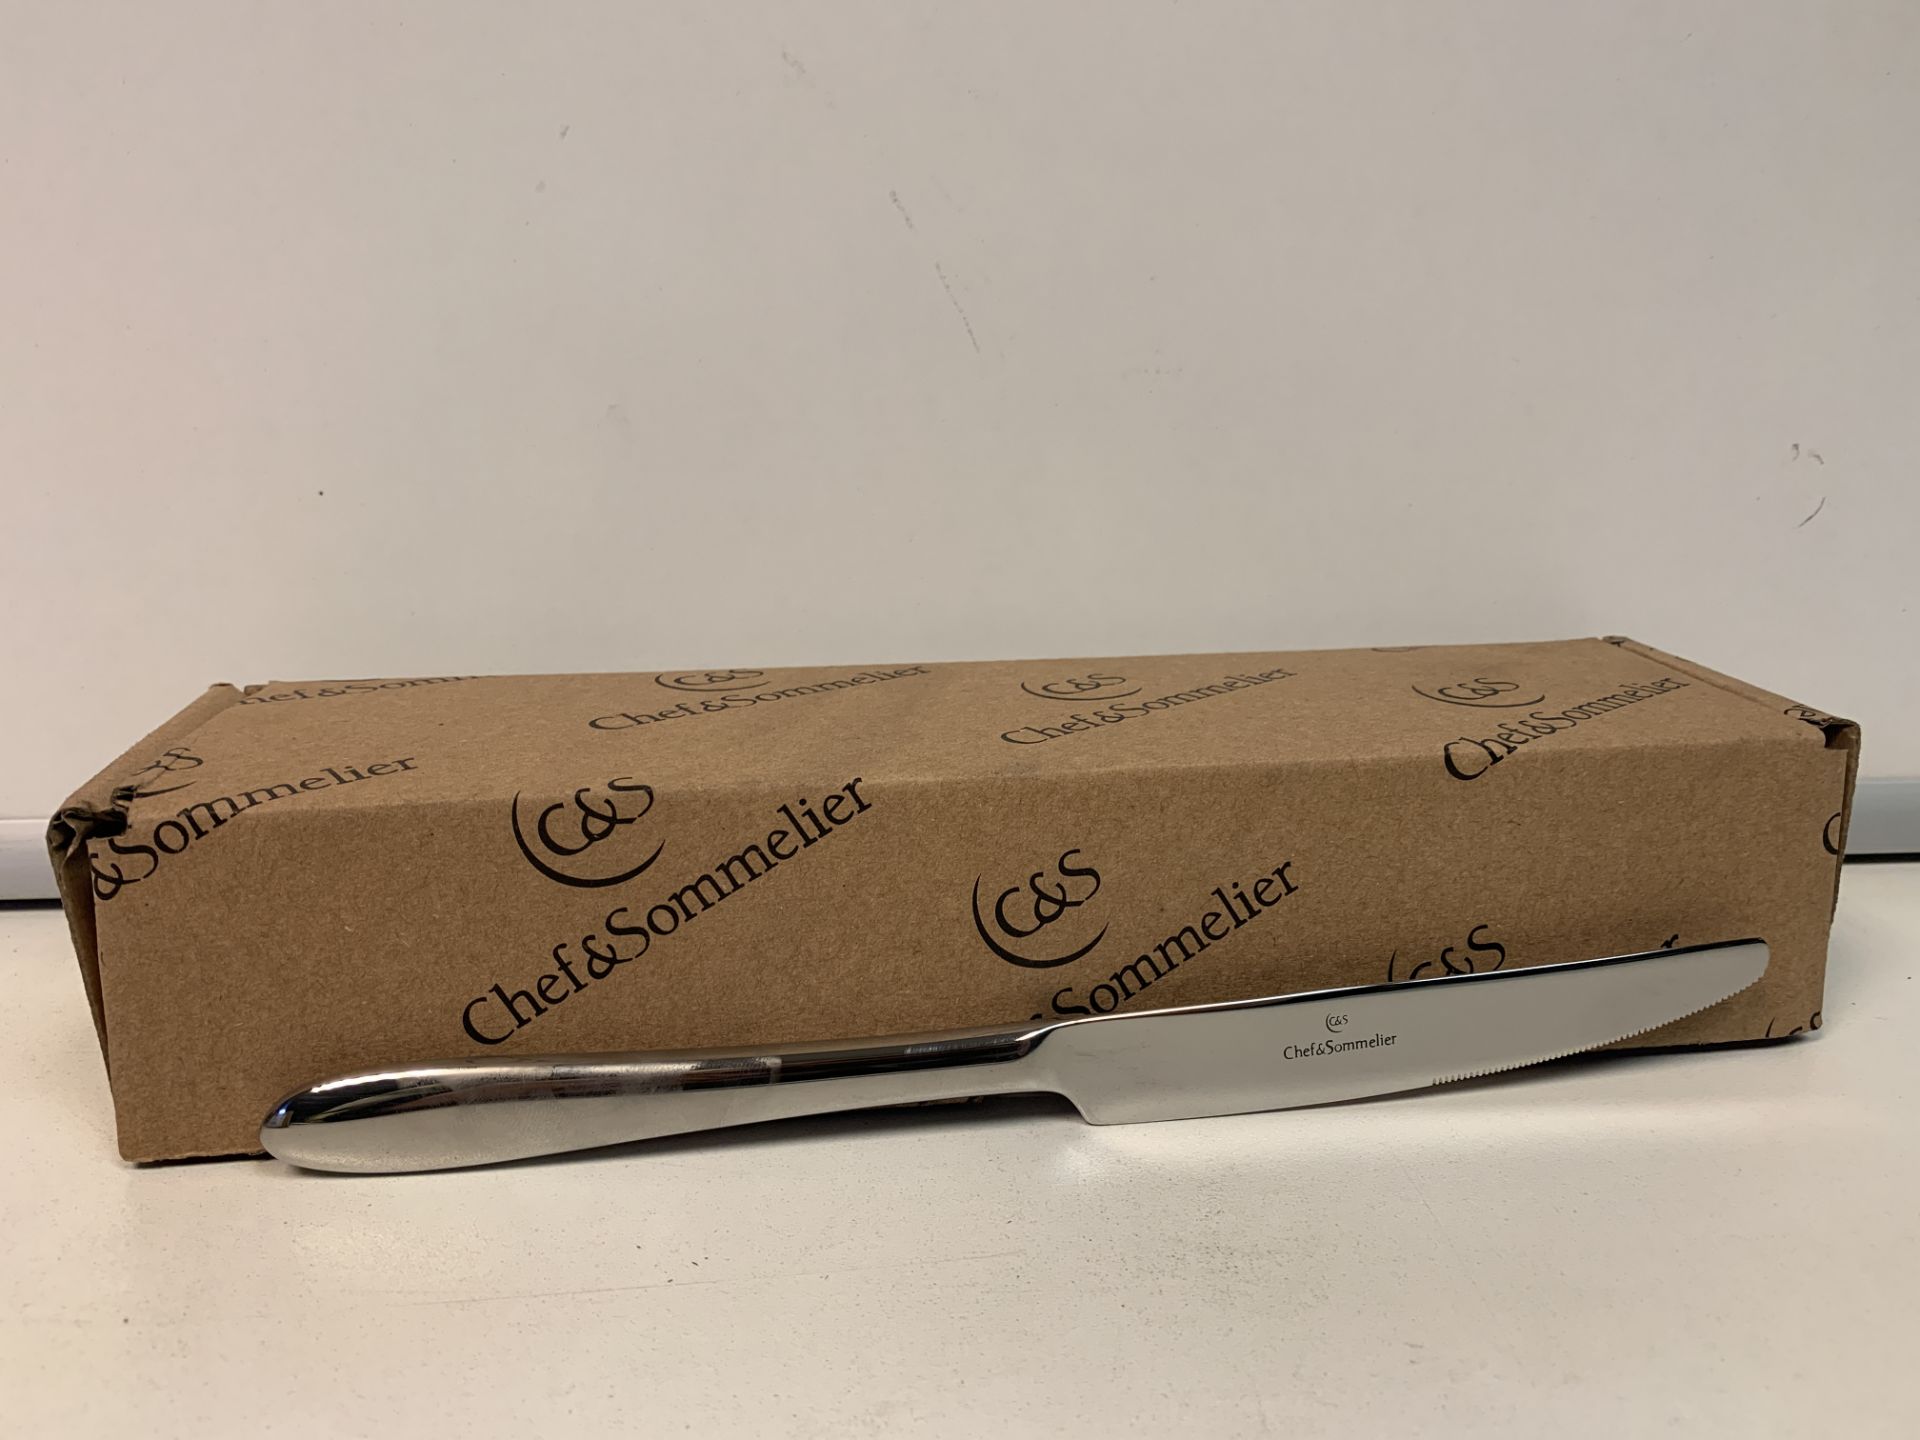 3 X BRAND NEW PACKS OF 12 CHEF AND SOMMELLIER LAZZO DESSERT KNIVES IN RRP £80 PER PACK R1